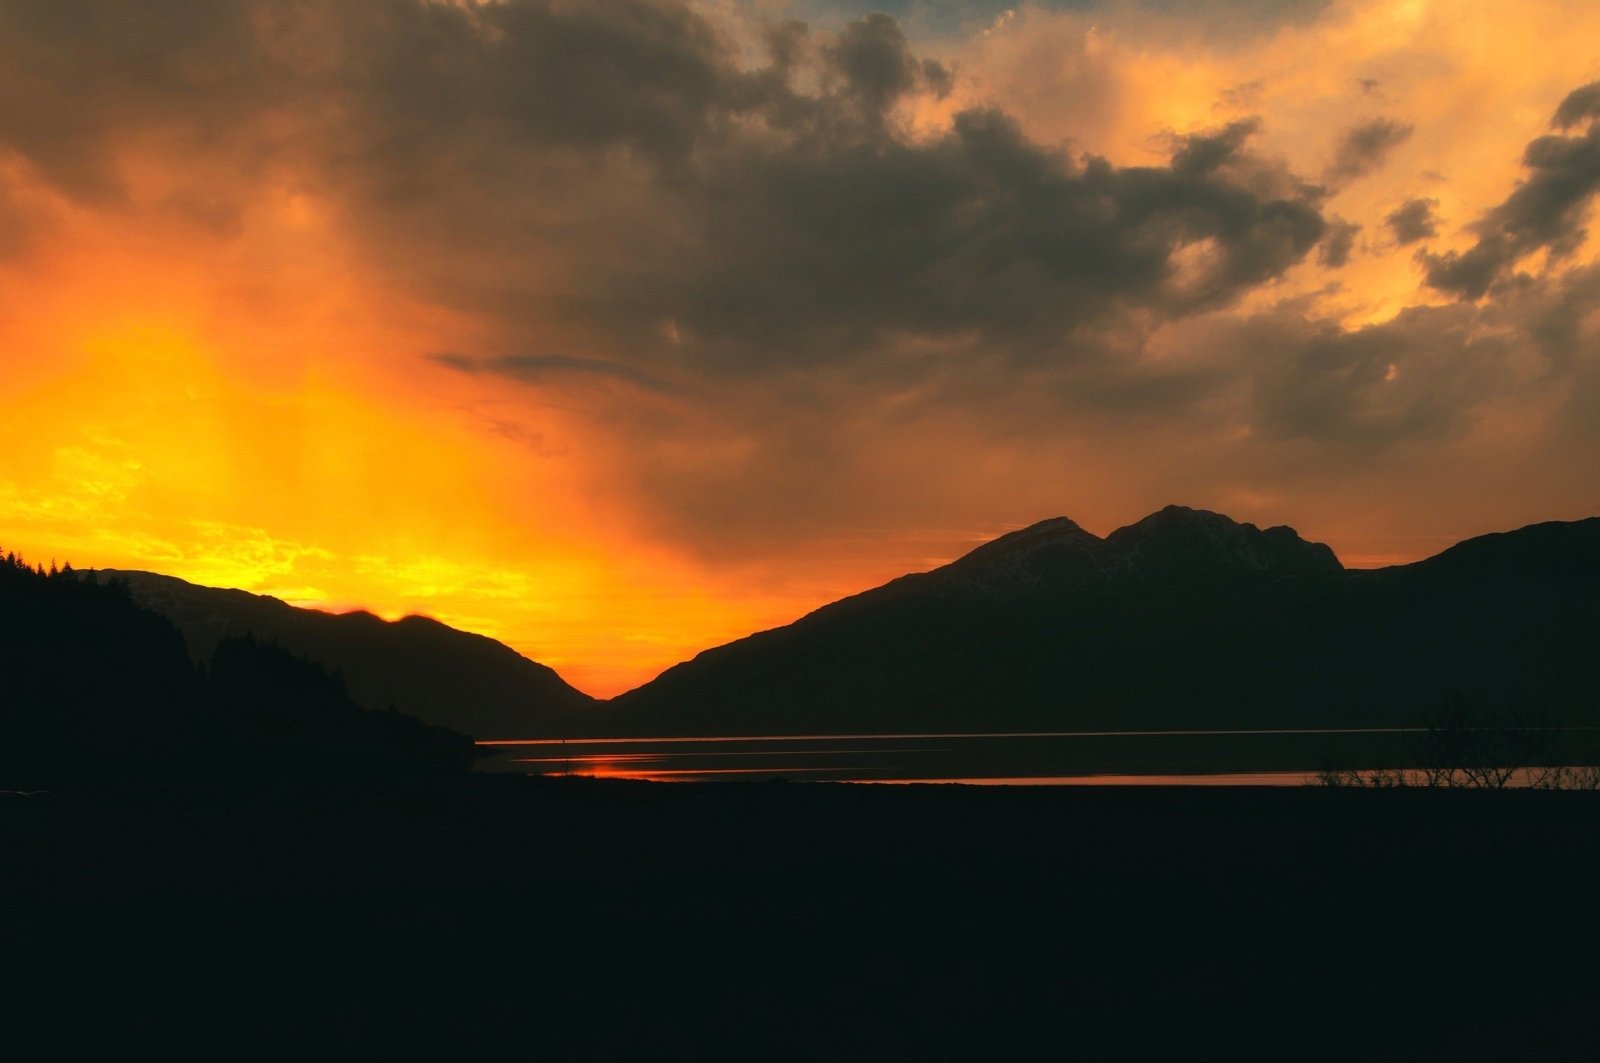 Loch Leven Sunset Scottish Landscape Photography-Scottish Landscape Photography-Scottish Lochs & Mountains Art Gallery-Paintings, Prints, Homeware, Art Gifts From Scotland By Scottish Artist Kevin Hunter